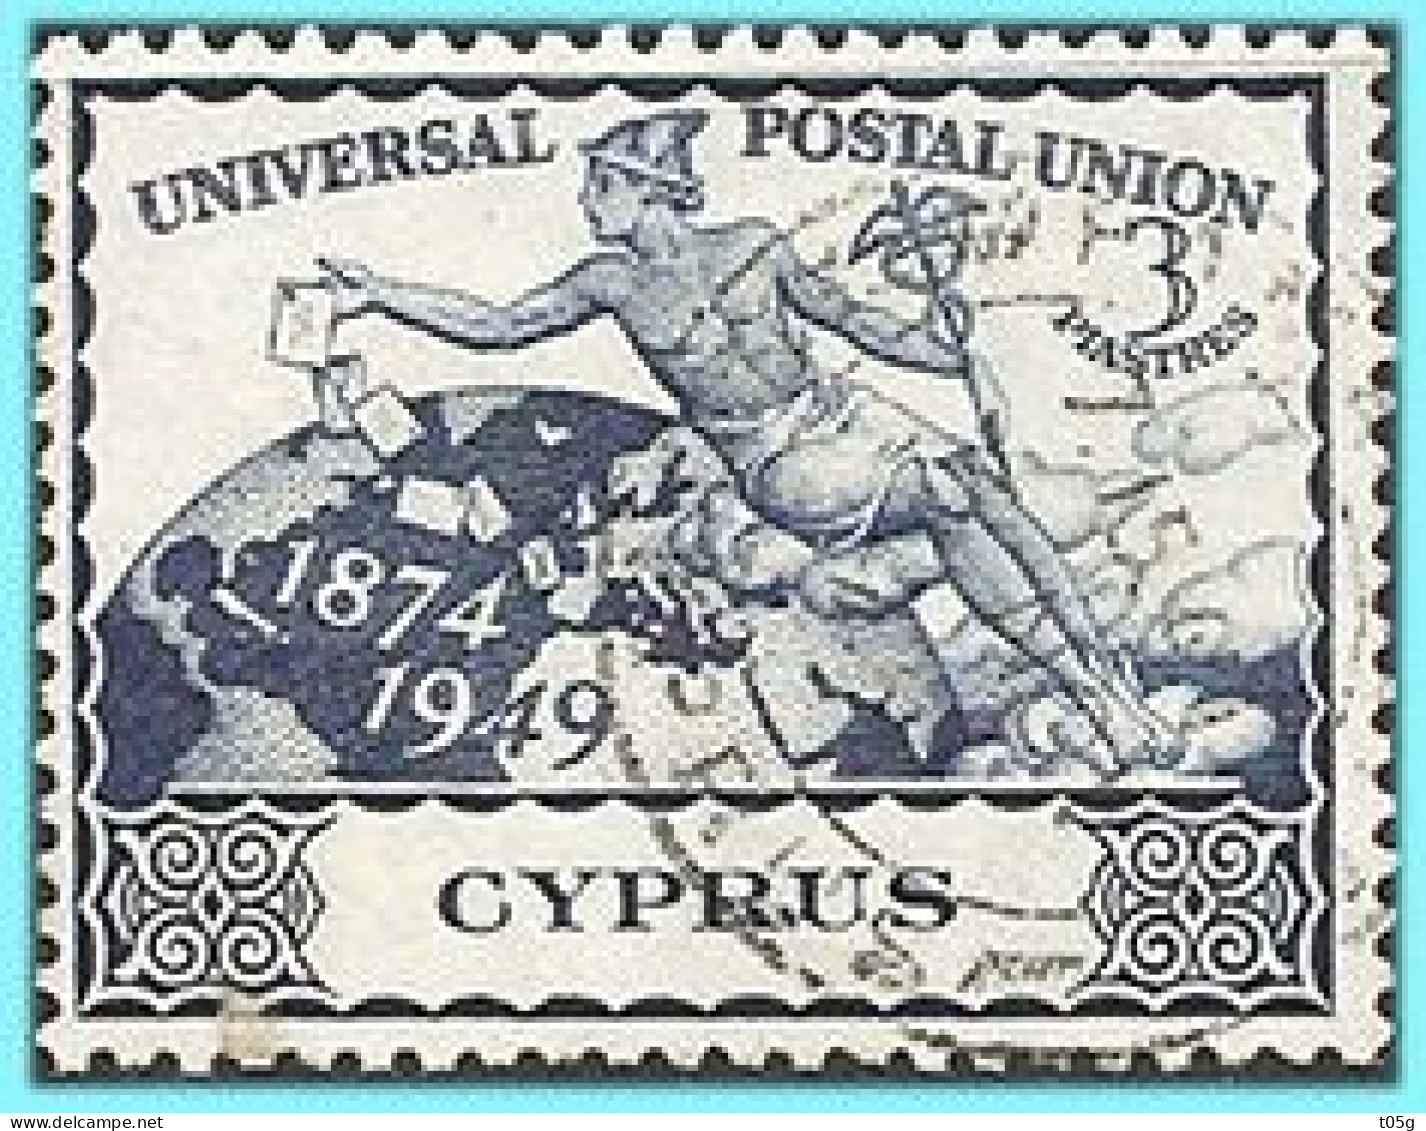 CYPRUS- GREECE- GRECE- HELLAS 1953: from set  Used - Used Stamps